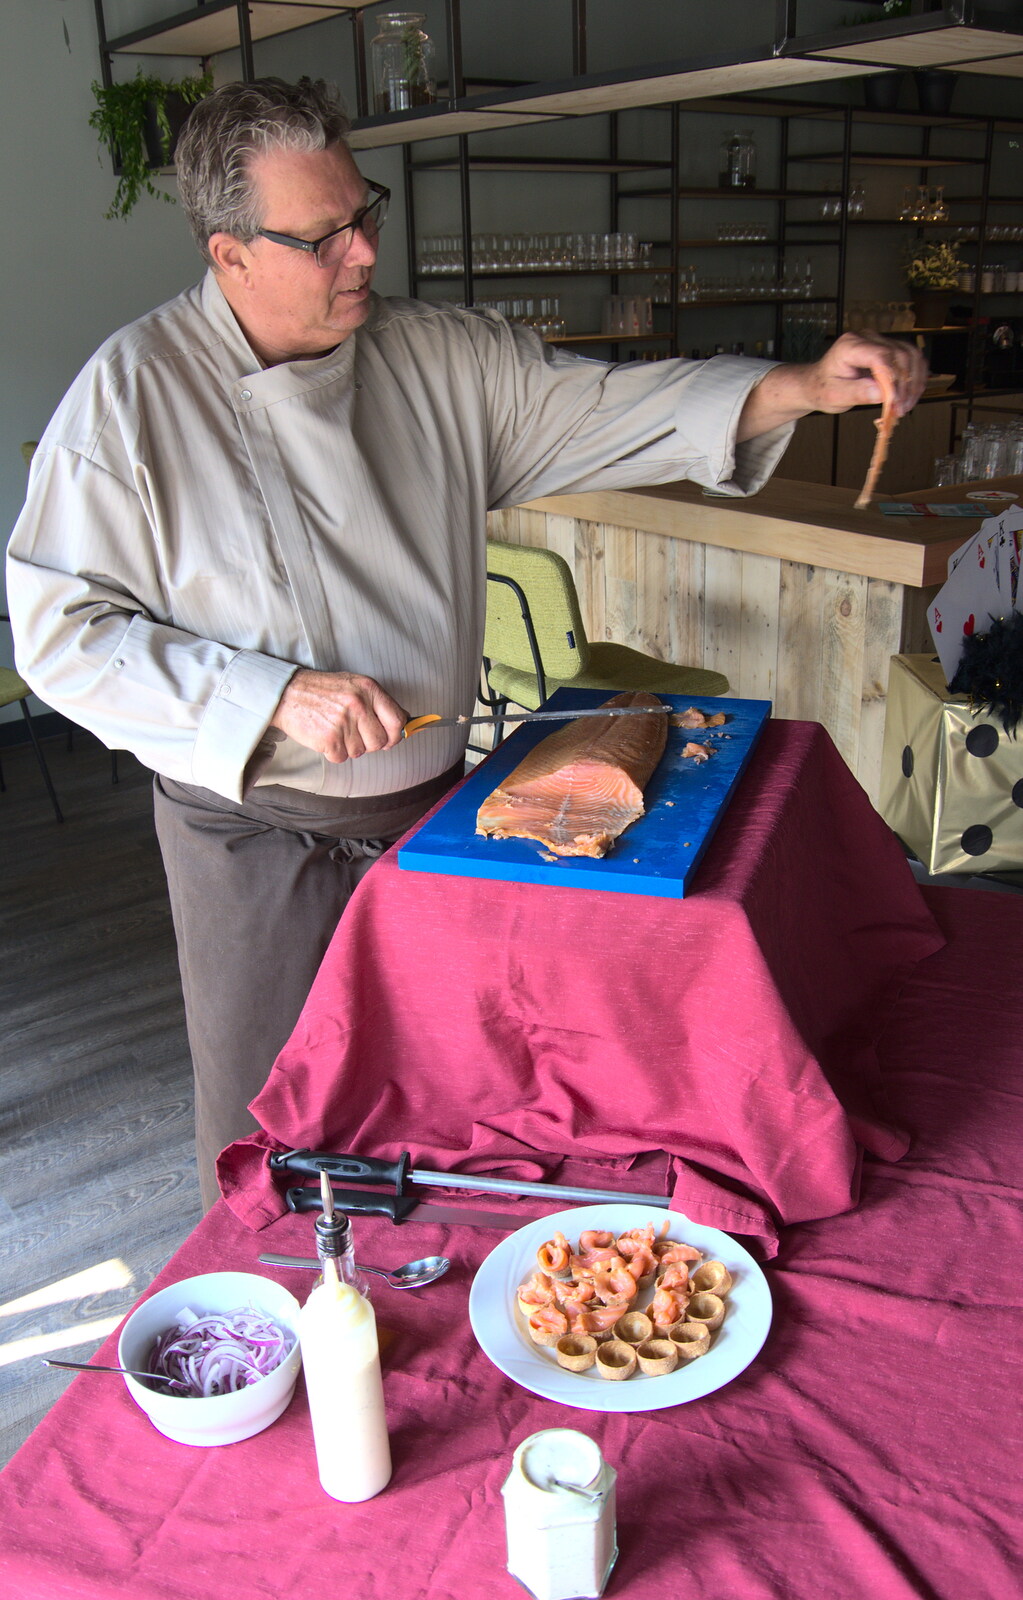 The salmon dude offers out some tasty smoked fish from A Postcard From Asperen, Gelderland, Netherlands - 9th June 2018